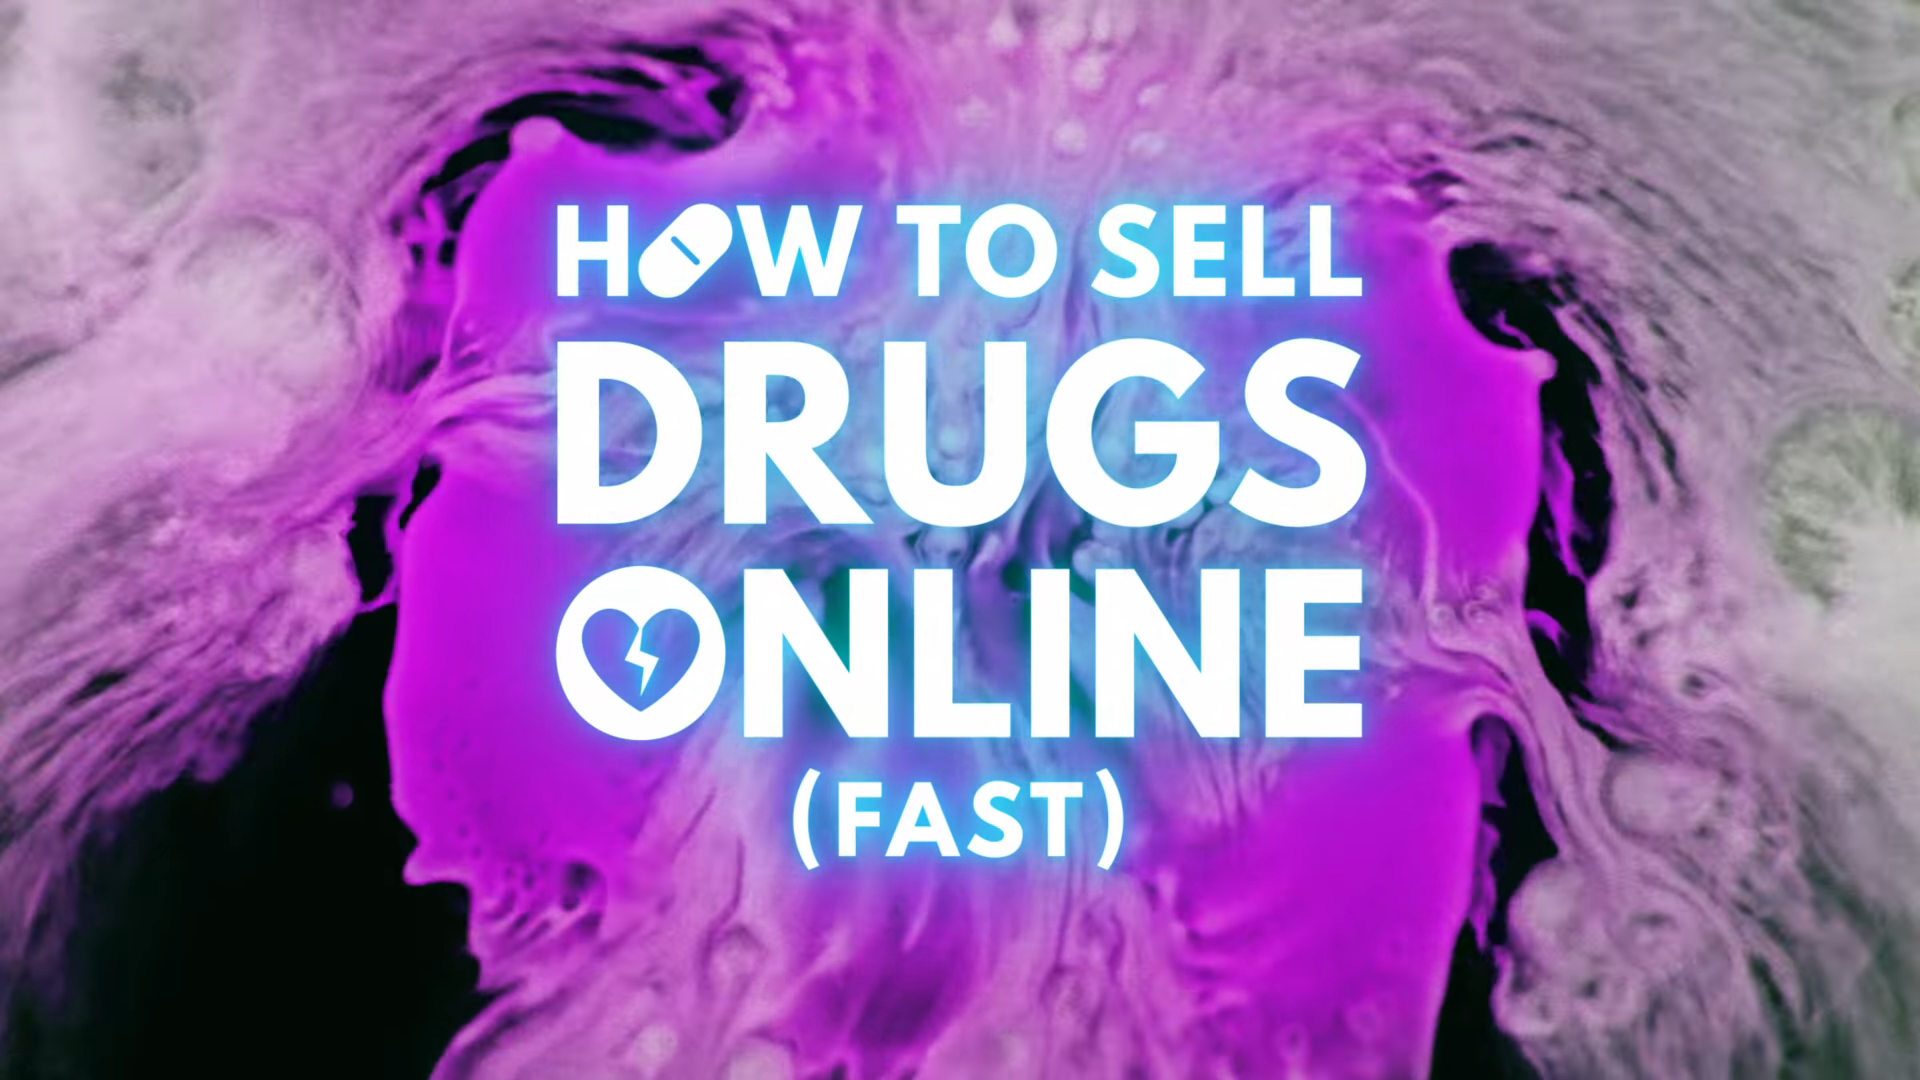 🎬 How to Sell Drugs Online (Fast) [TRAILER] Coming to Netflix May 31, 2019 1